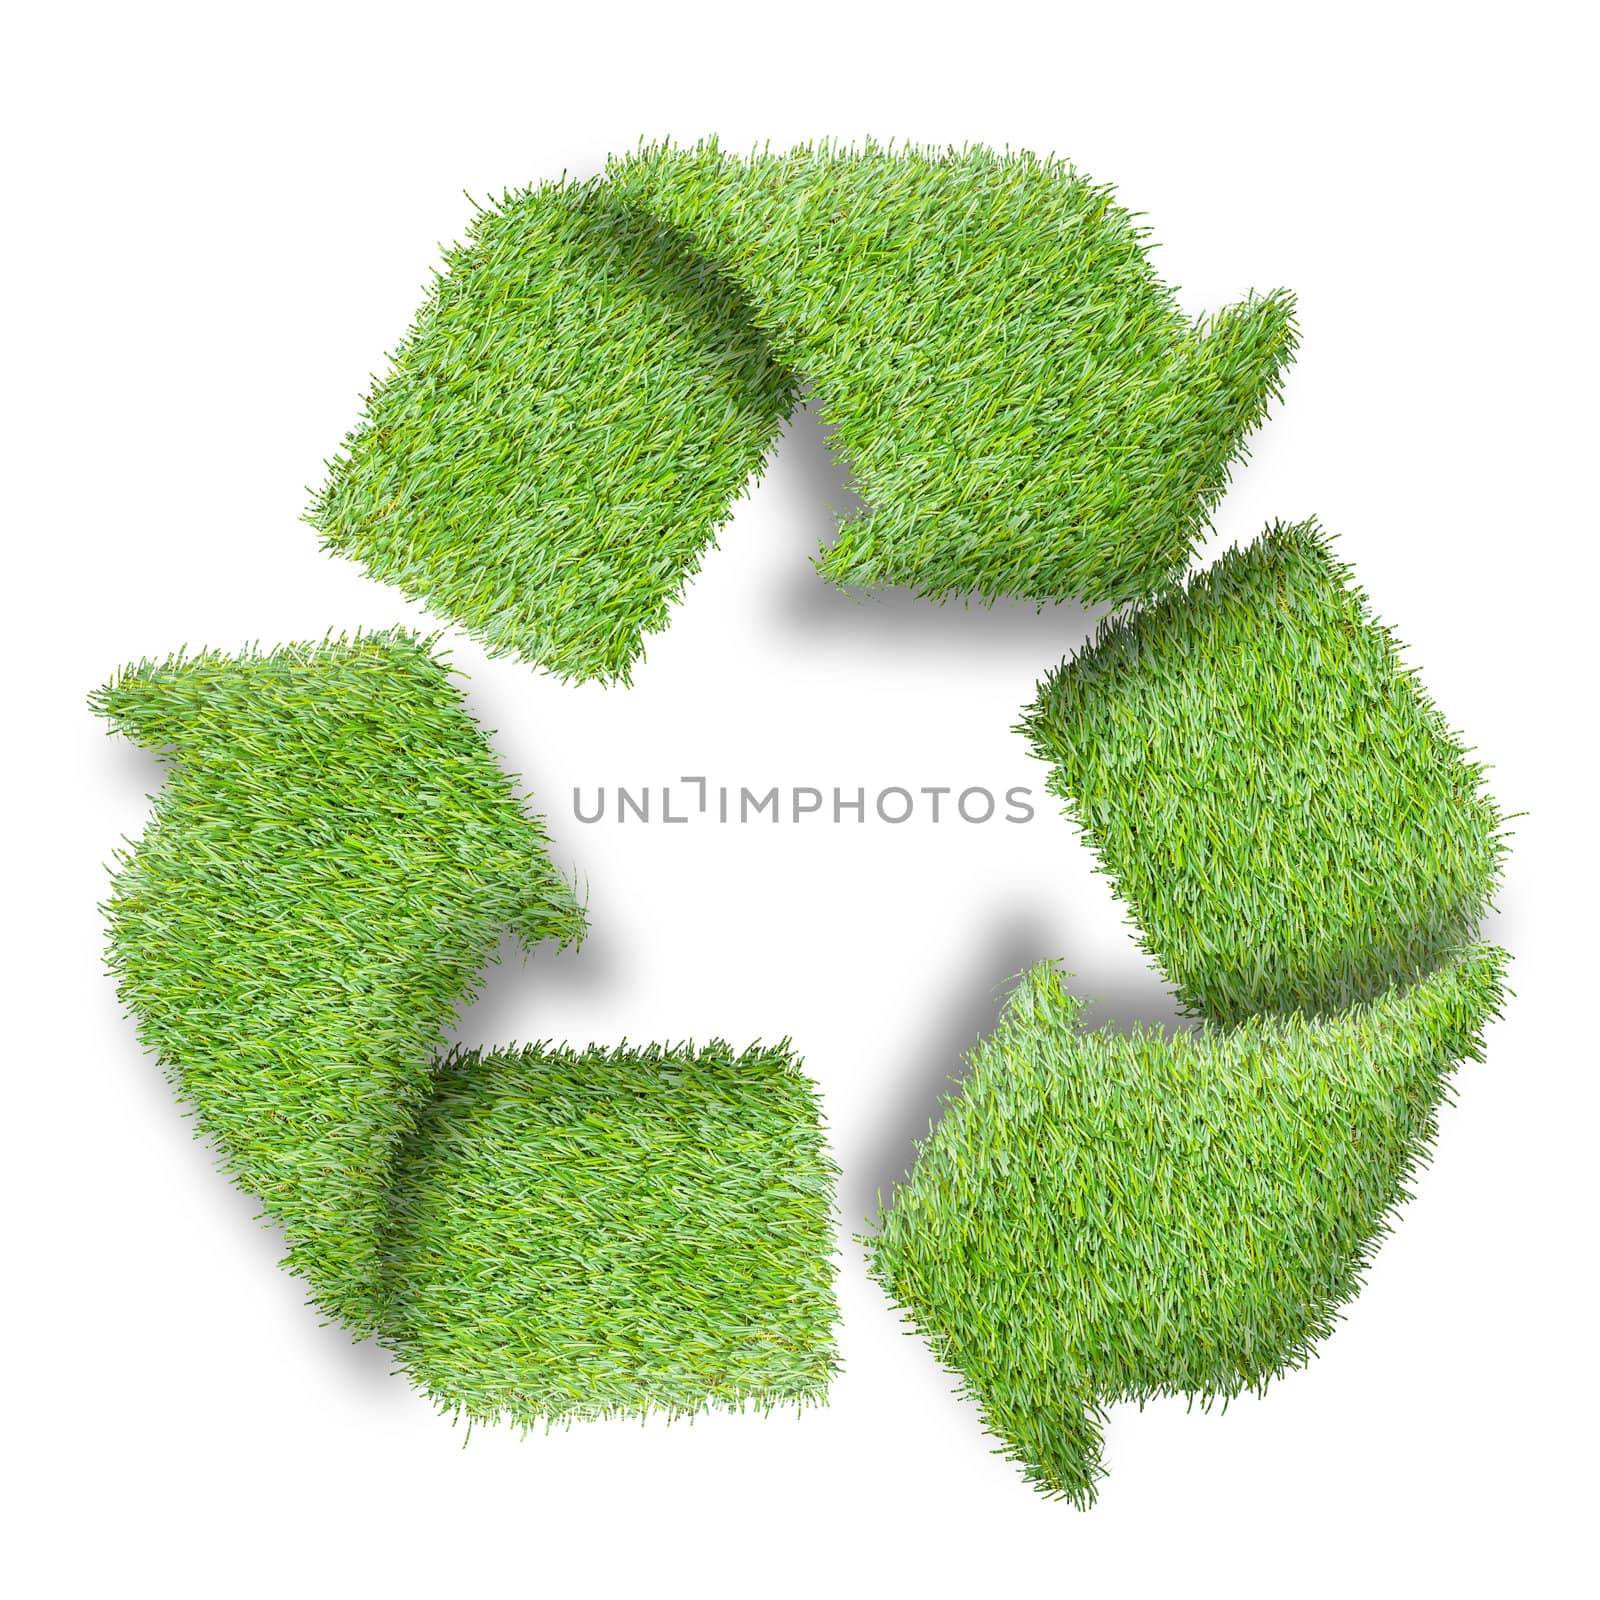 Recycle logo symbol from the green grass, isolated on white